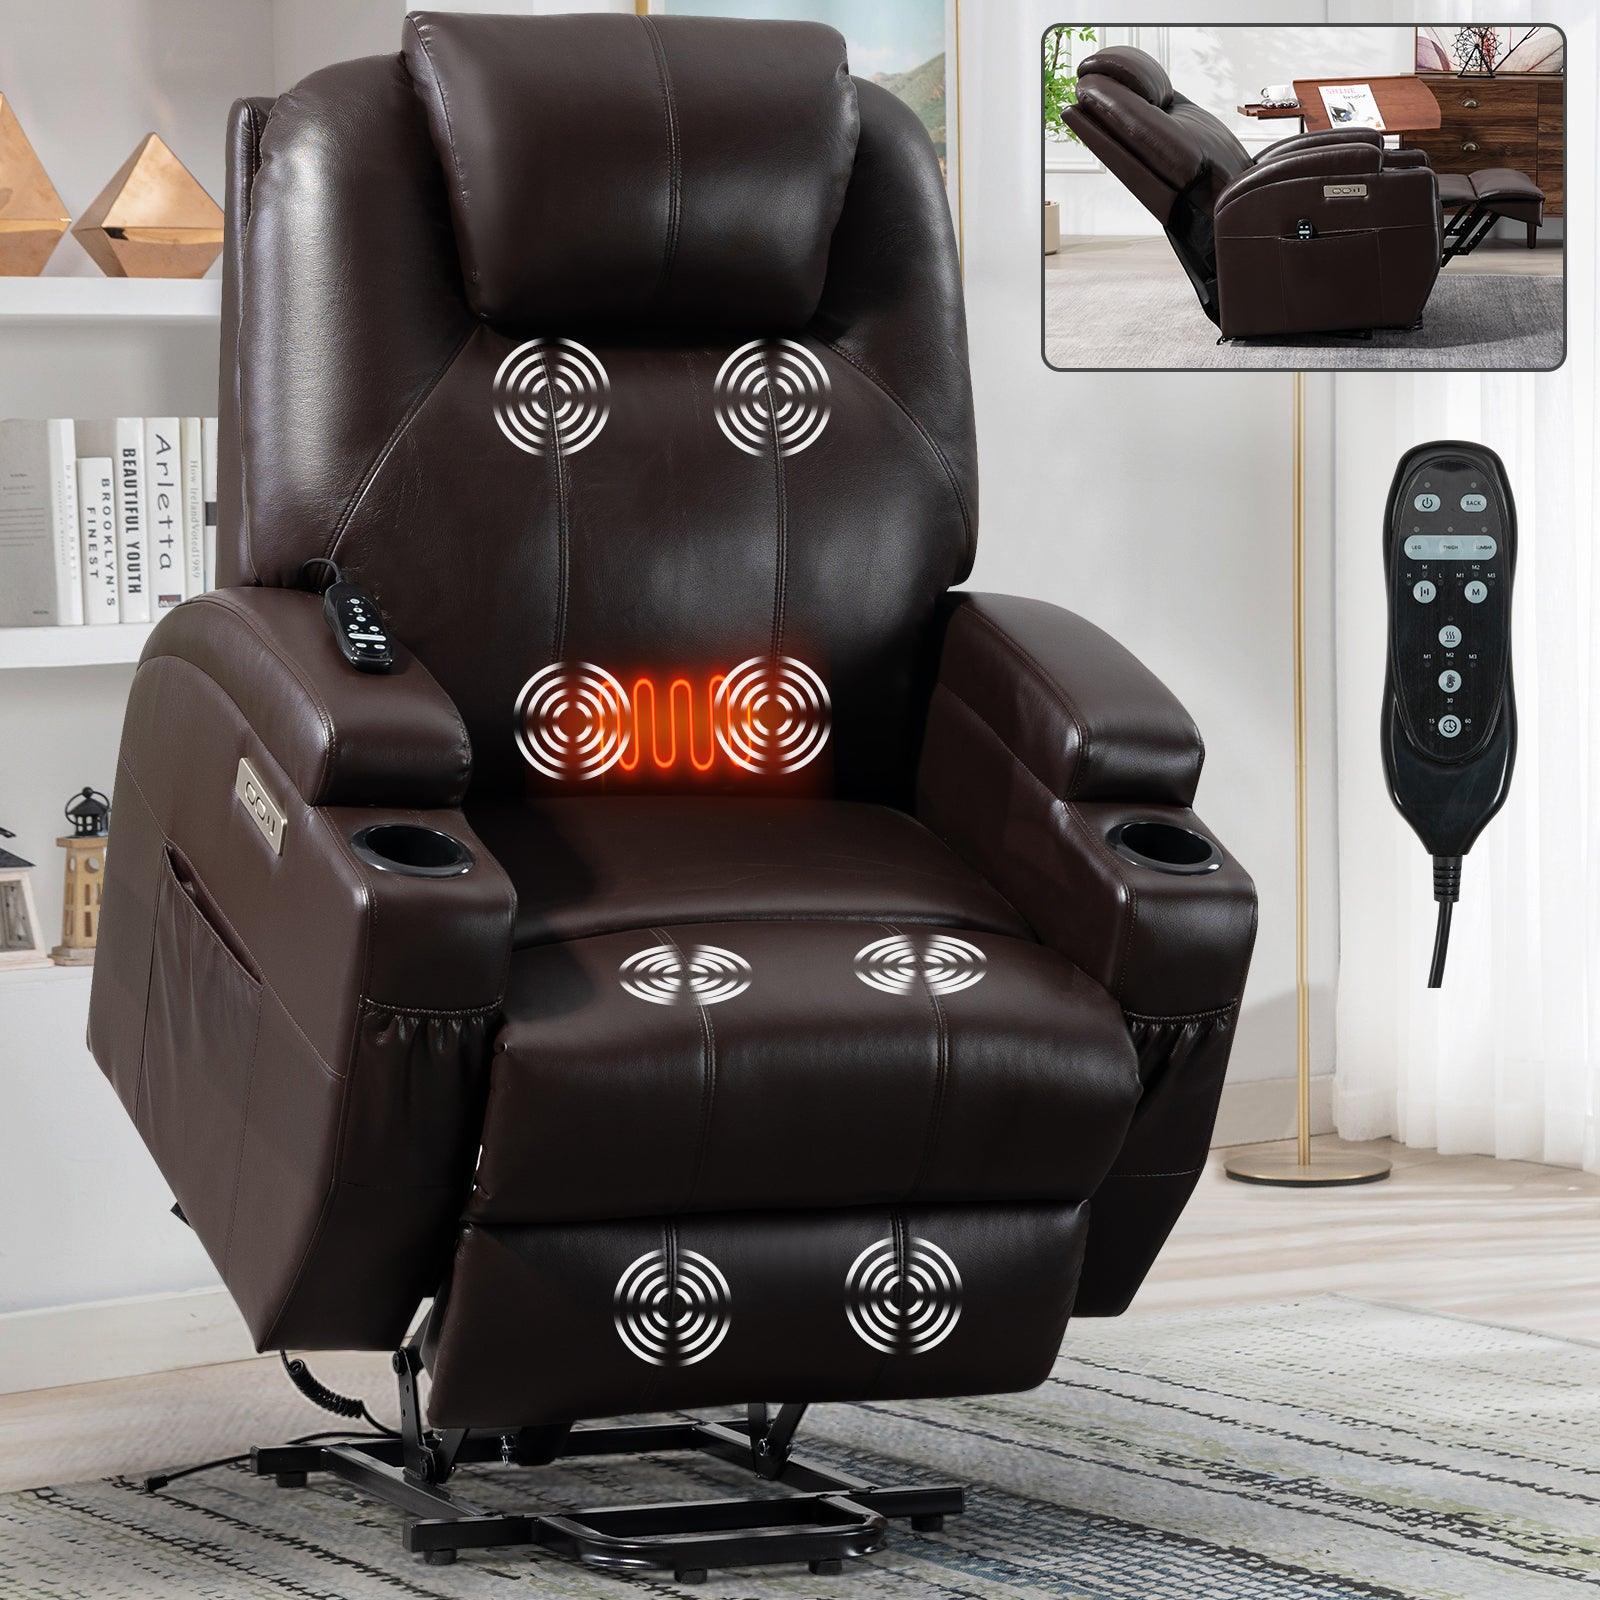 🆓🚛 Okin Motor Power Lift Recliner Chair for Elderly, Heavy Duty Motion Mechanism With 8-Point Vibration Massage & Lumbar Heating, Two Cup Holders & Usb Charge Port, Brown